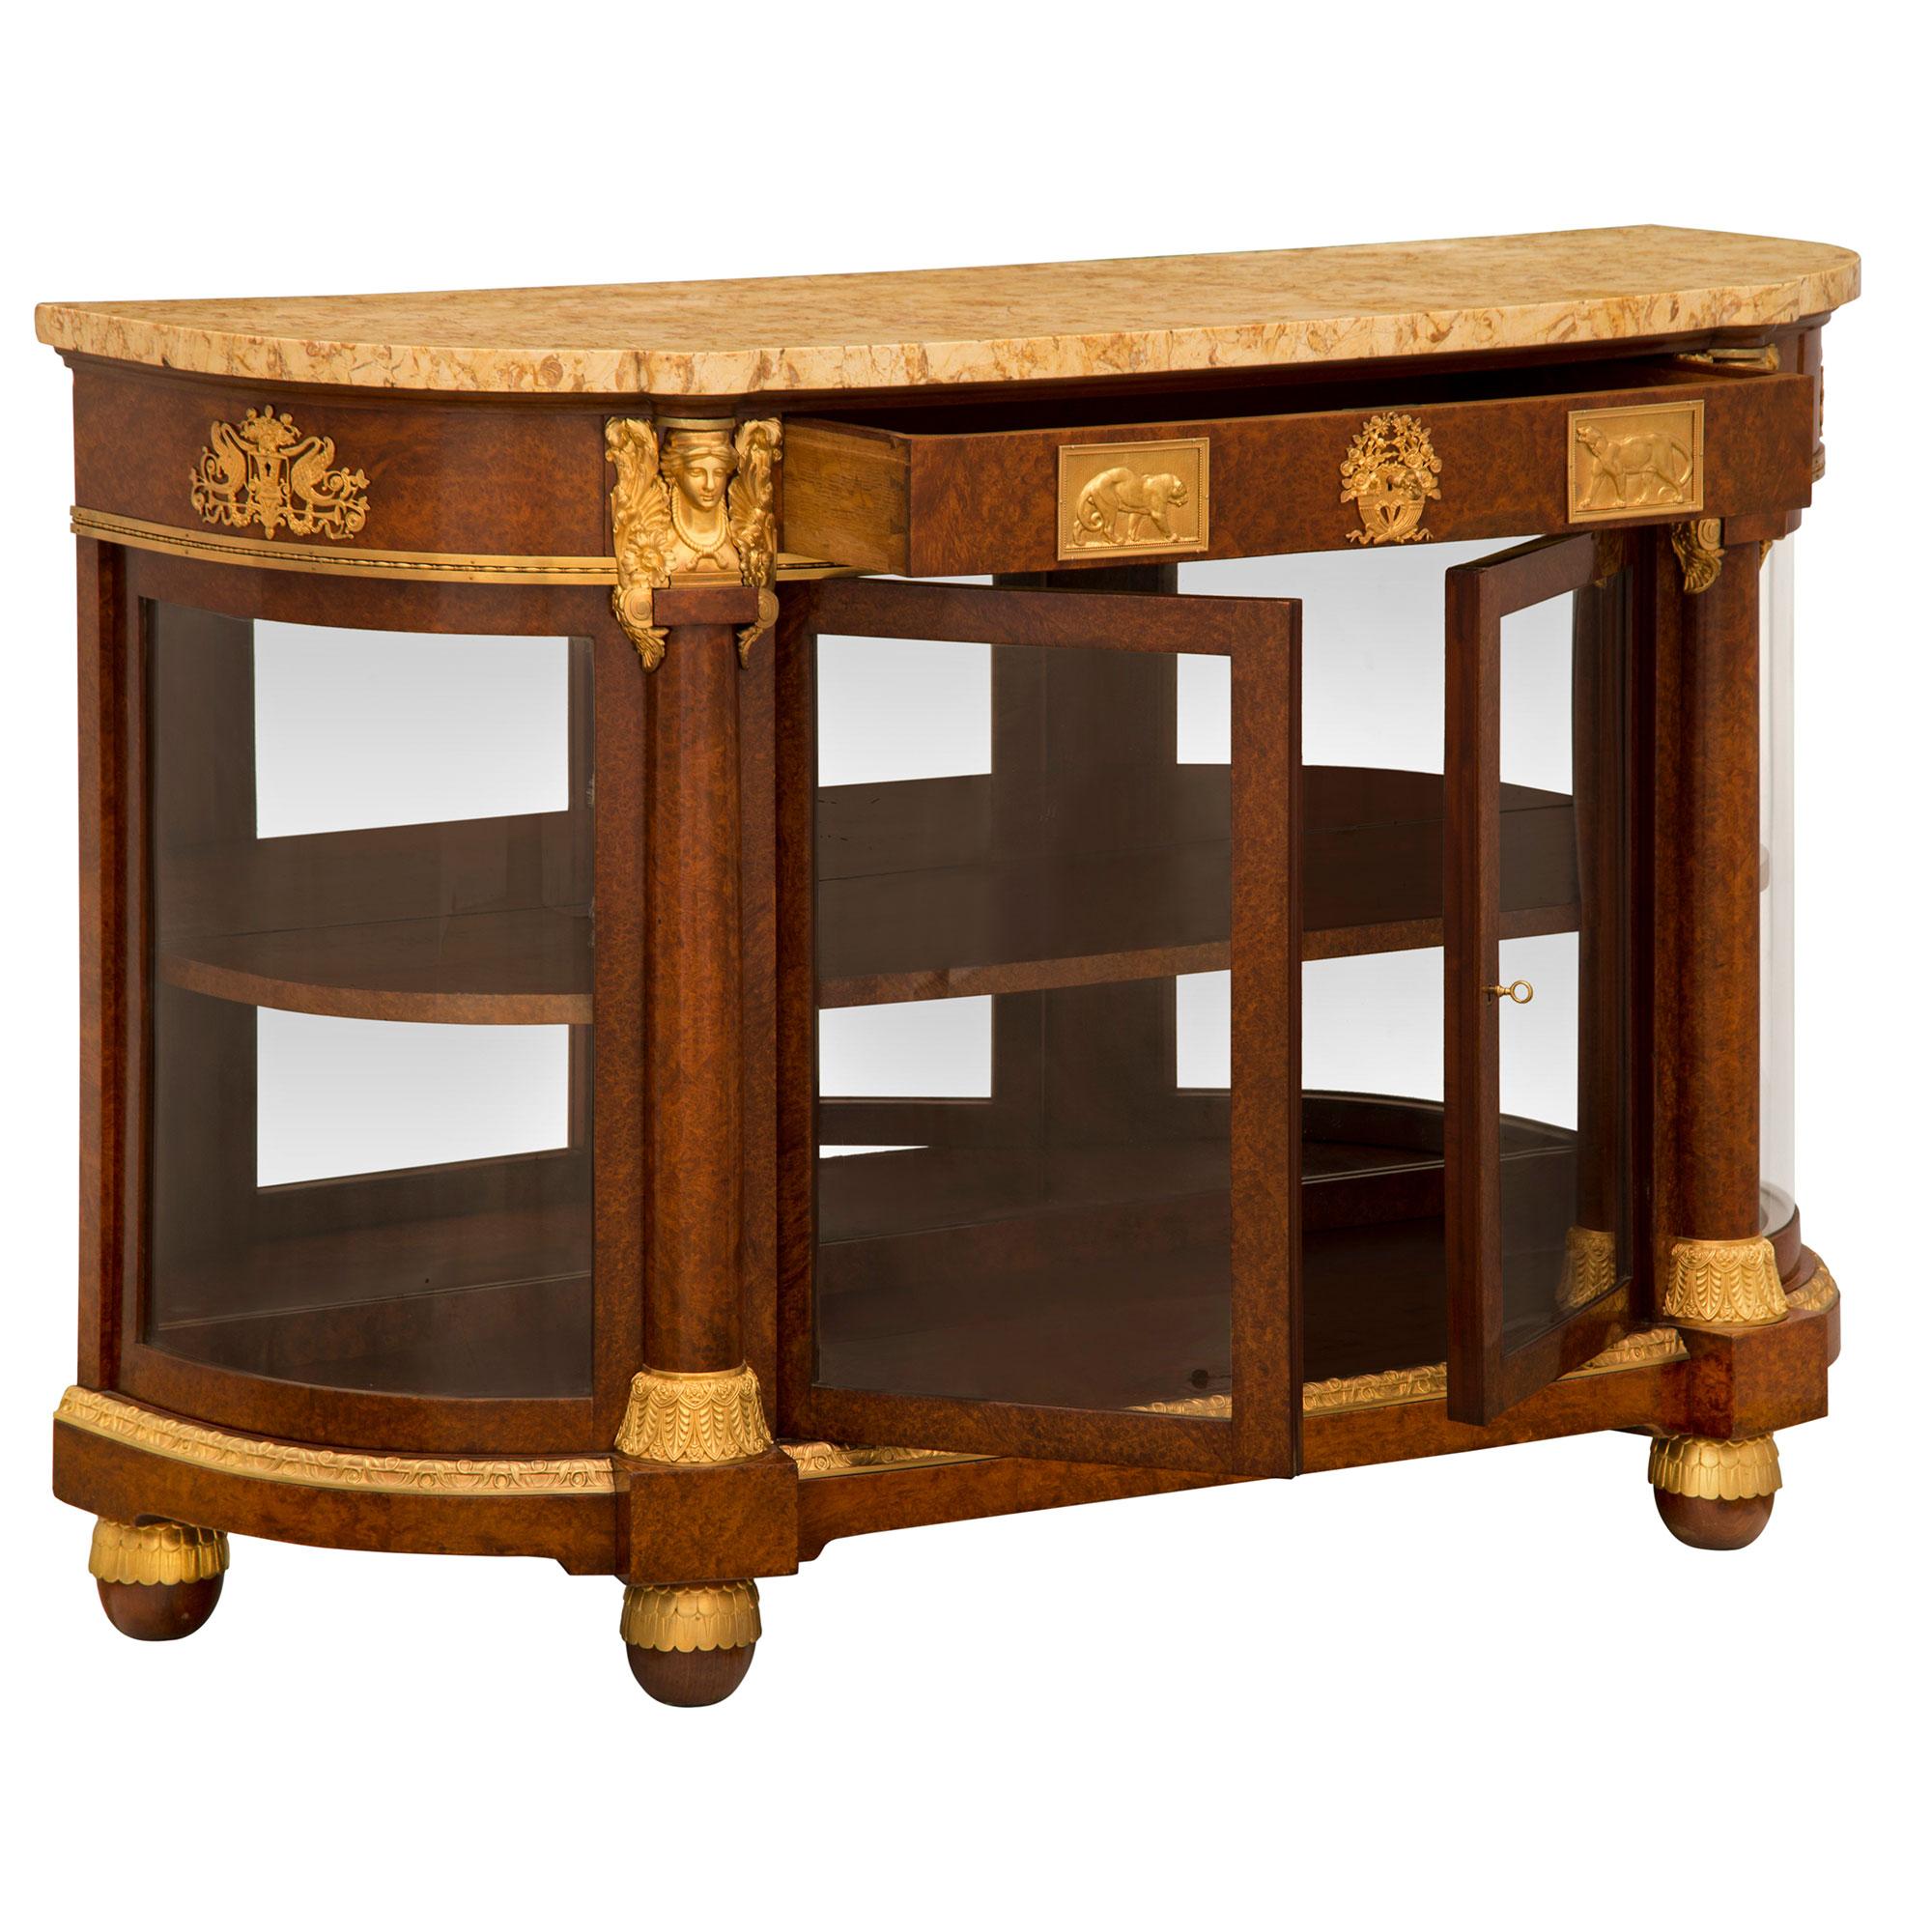 French 19th Century Neoclassical Style Burl Walnut and Ormolu Buffet Vitrine For Sale 1